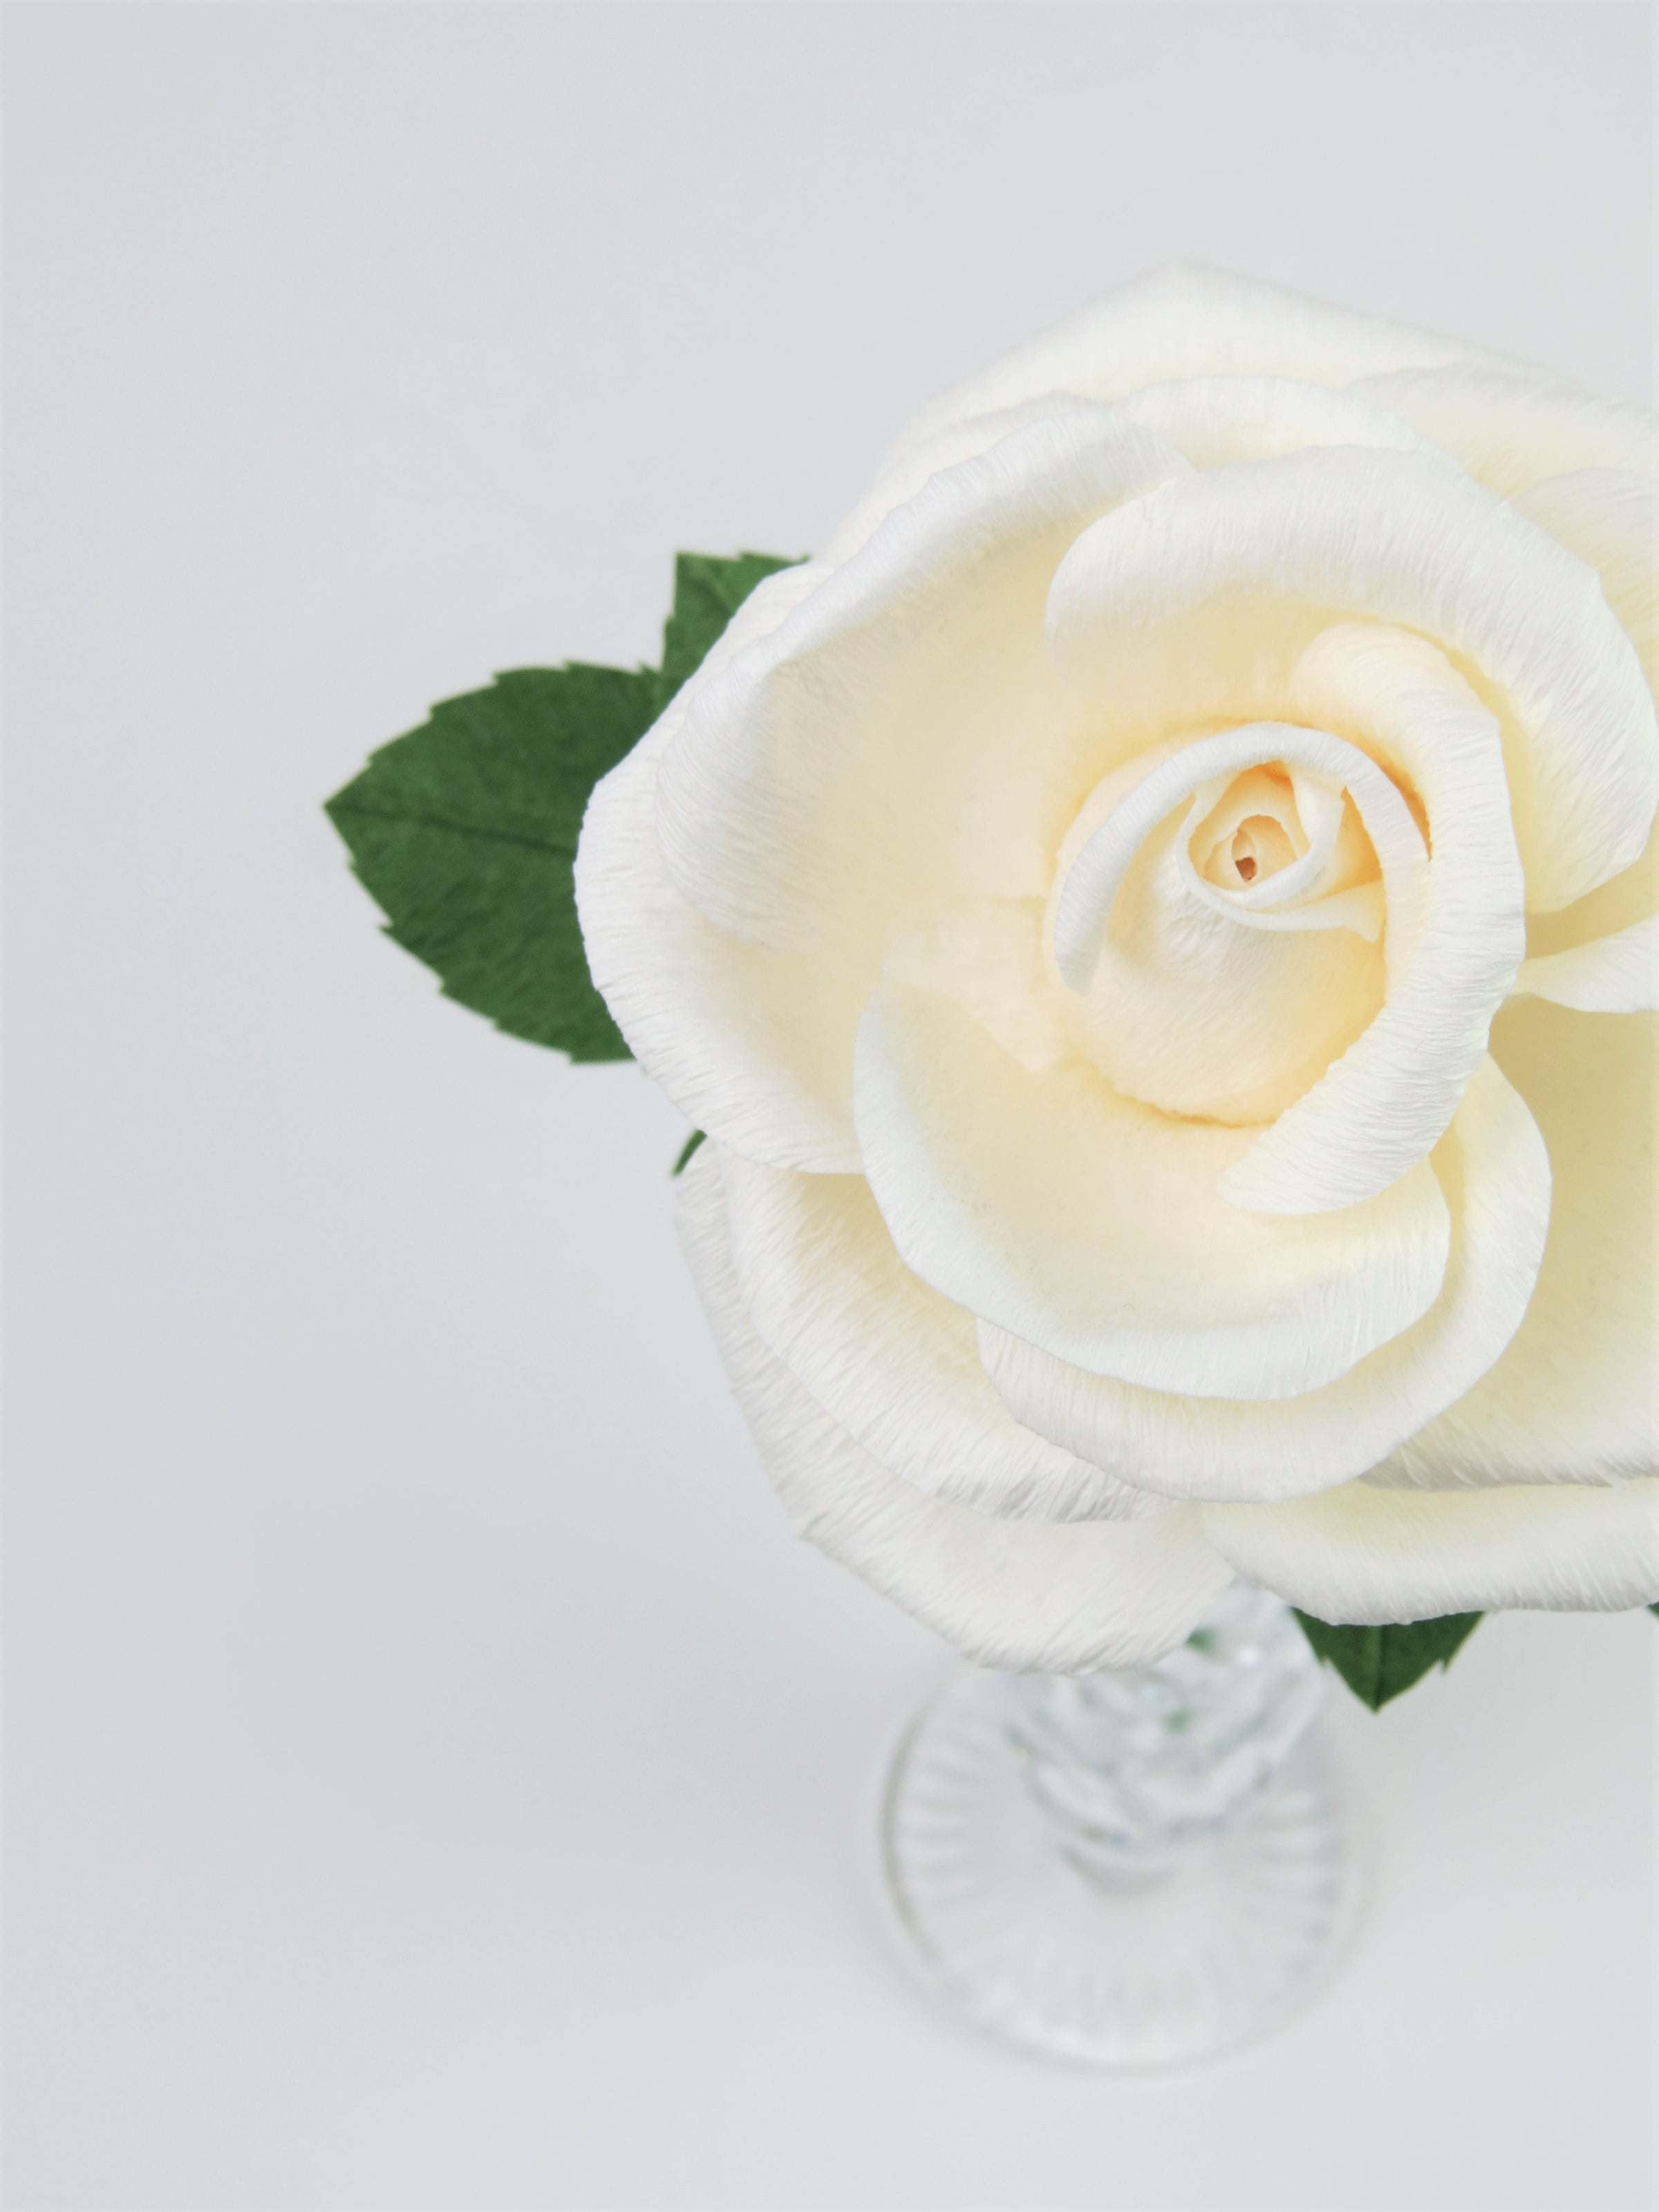 Aerial view of the centre of the white rose standing in a glass vase, with the hint of green leaves